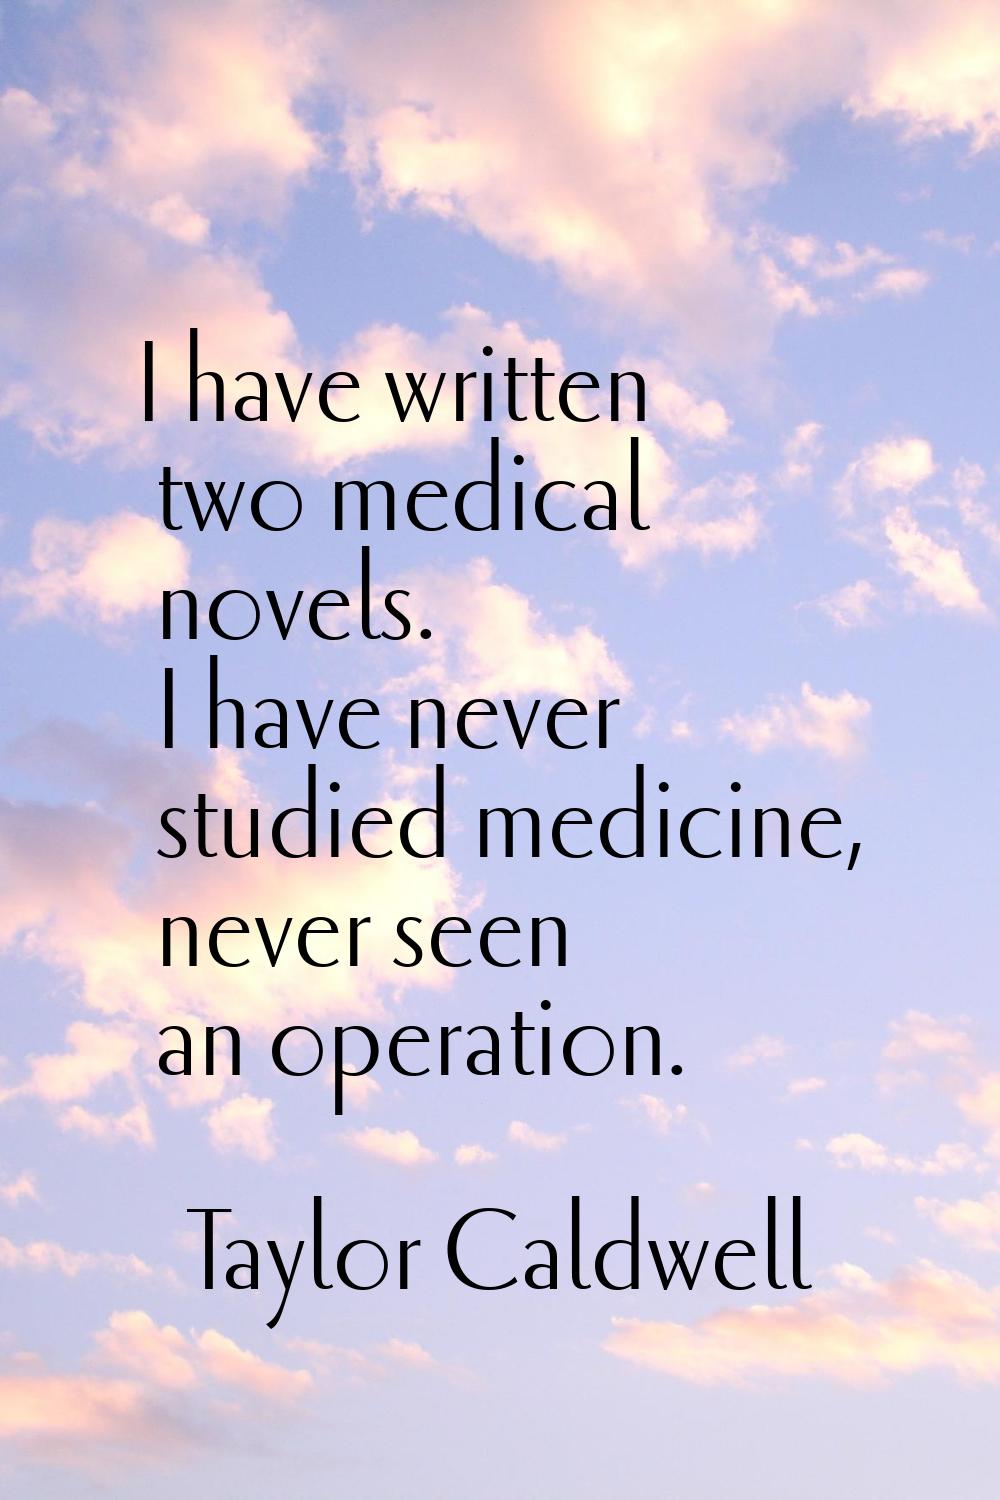 I have written two medical novels. I have never studied medicine, never seen an operation.